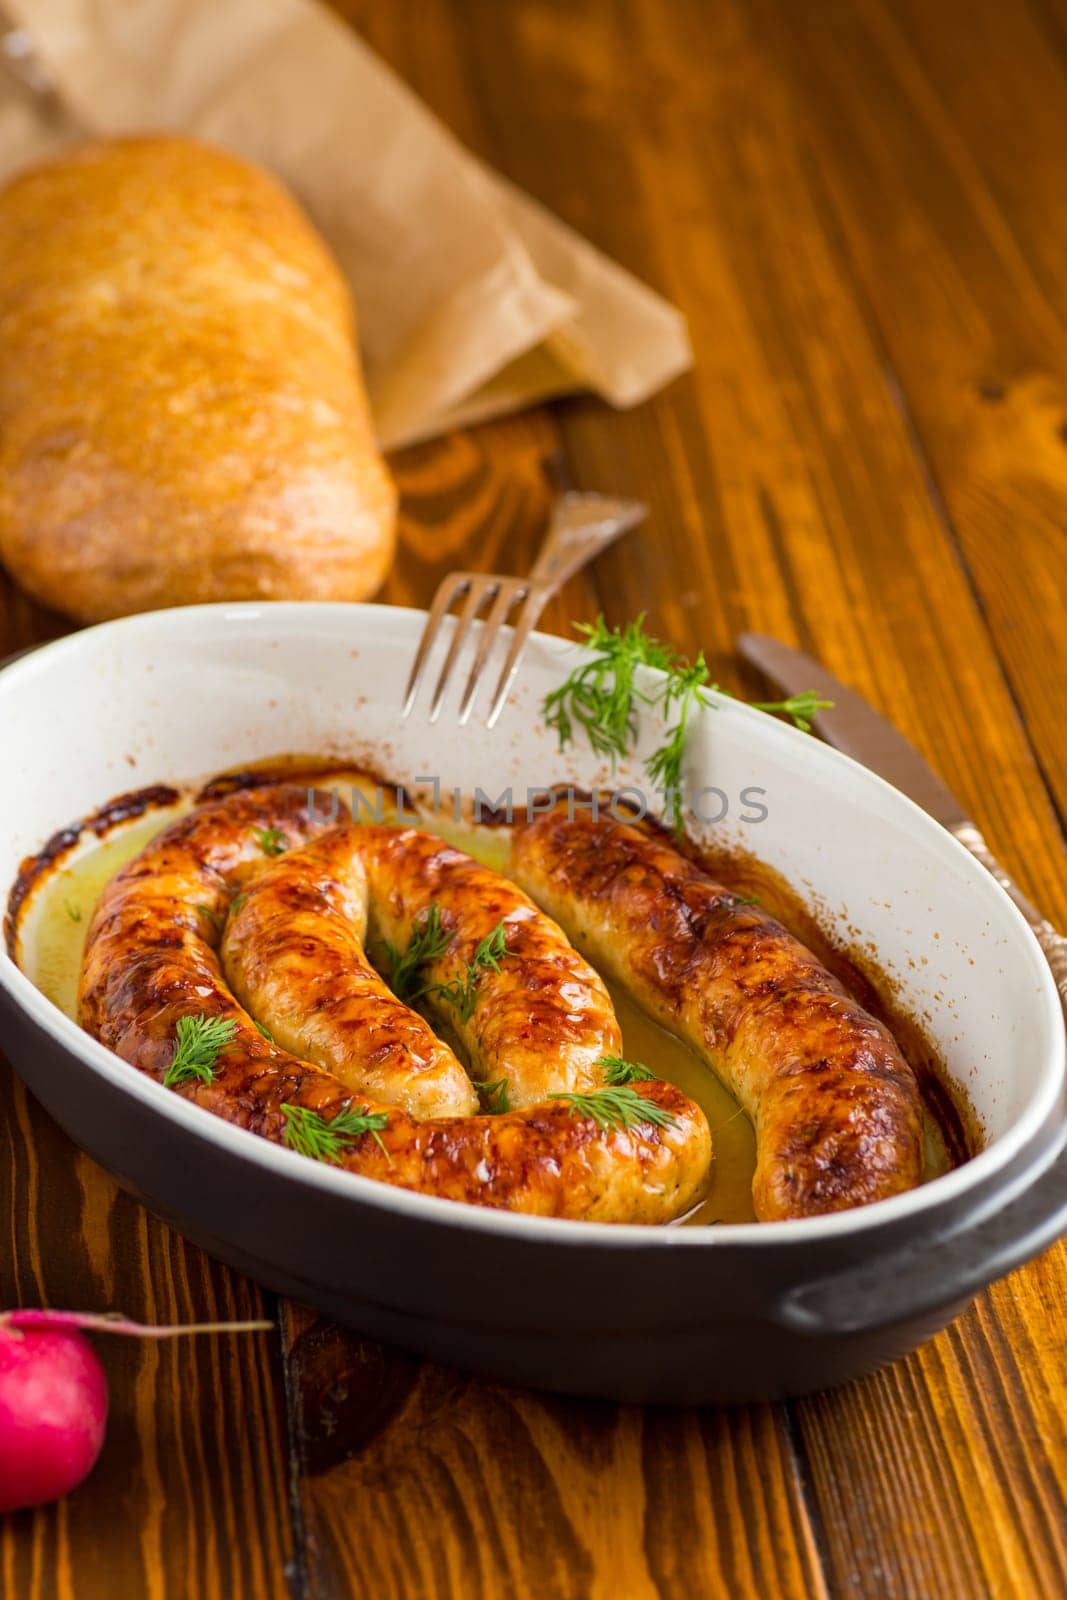 homemade sausage baked in the oven by Rawlik